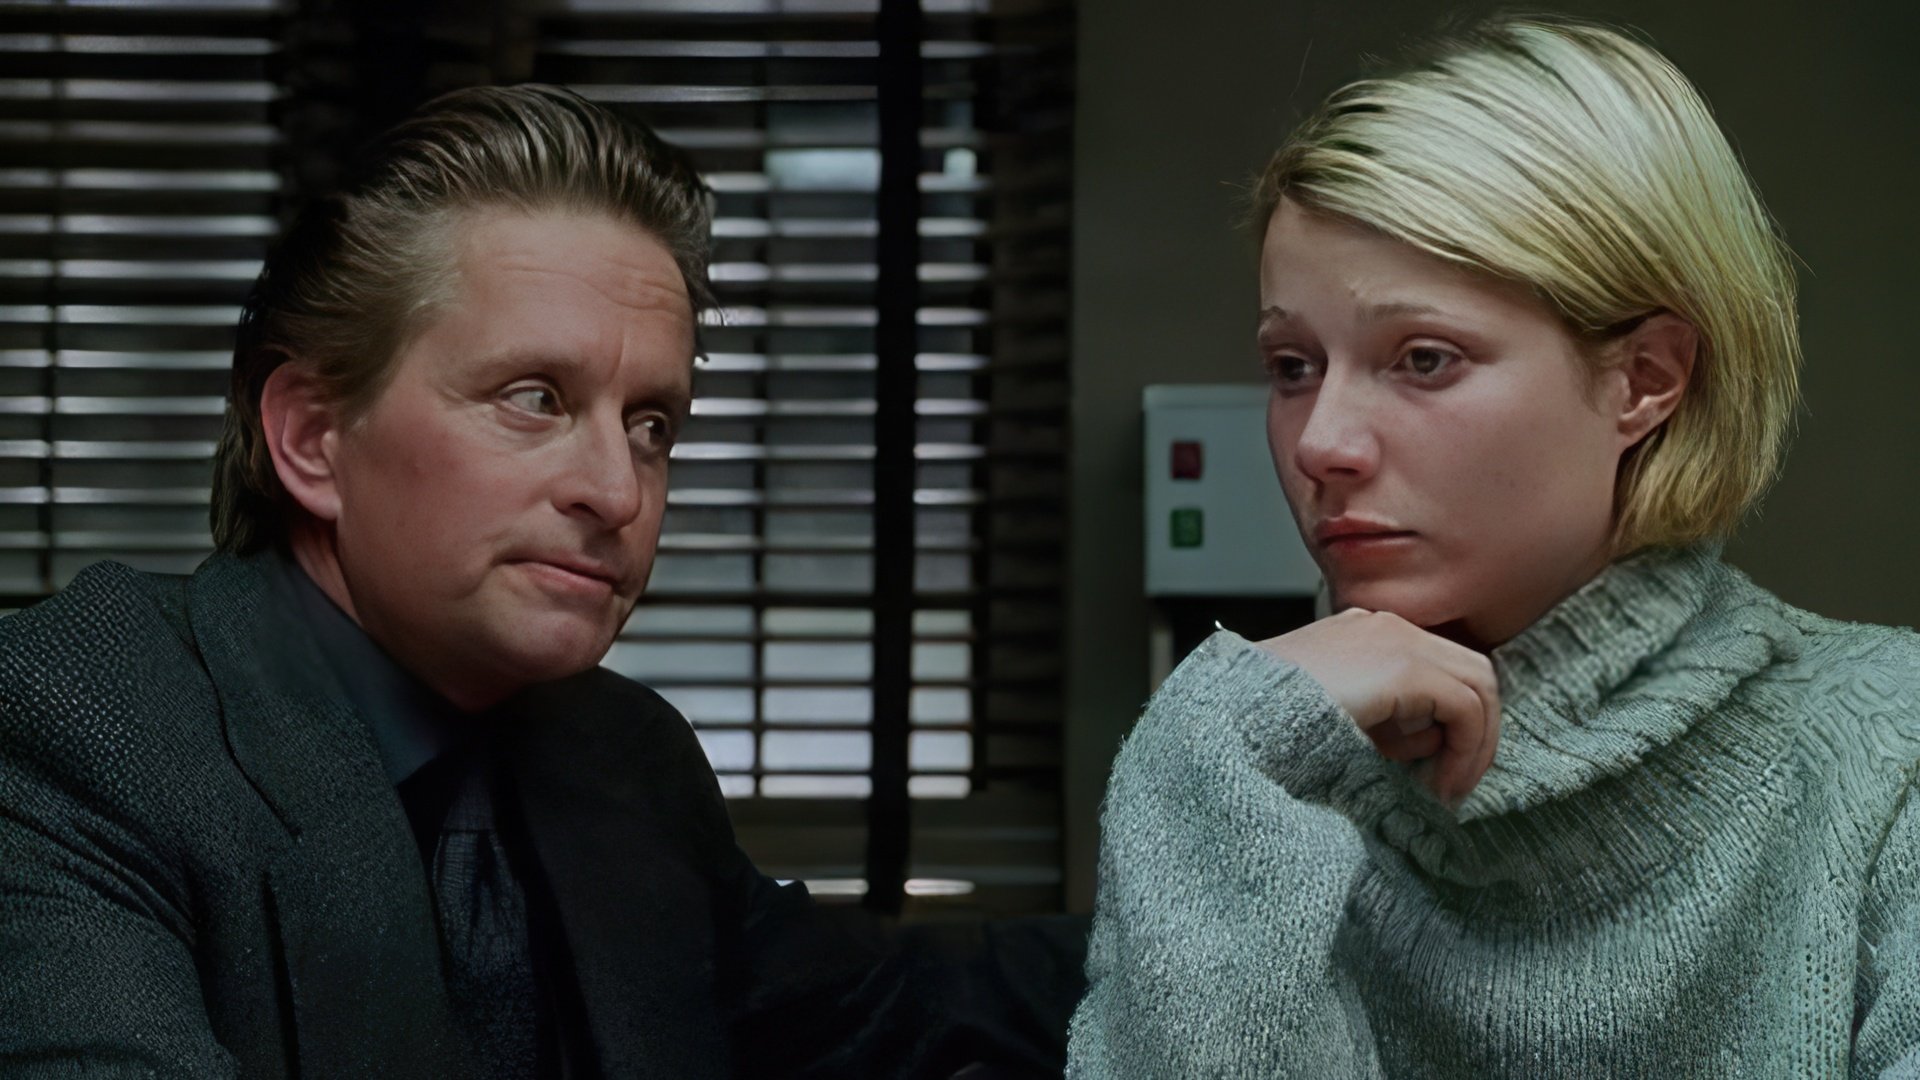 Michael Douglas and Gwyneth Paltrow in the film A Perfect Murder